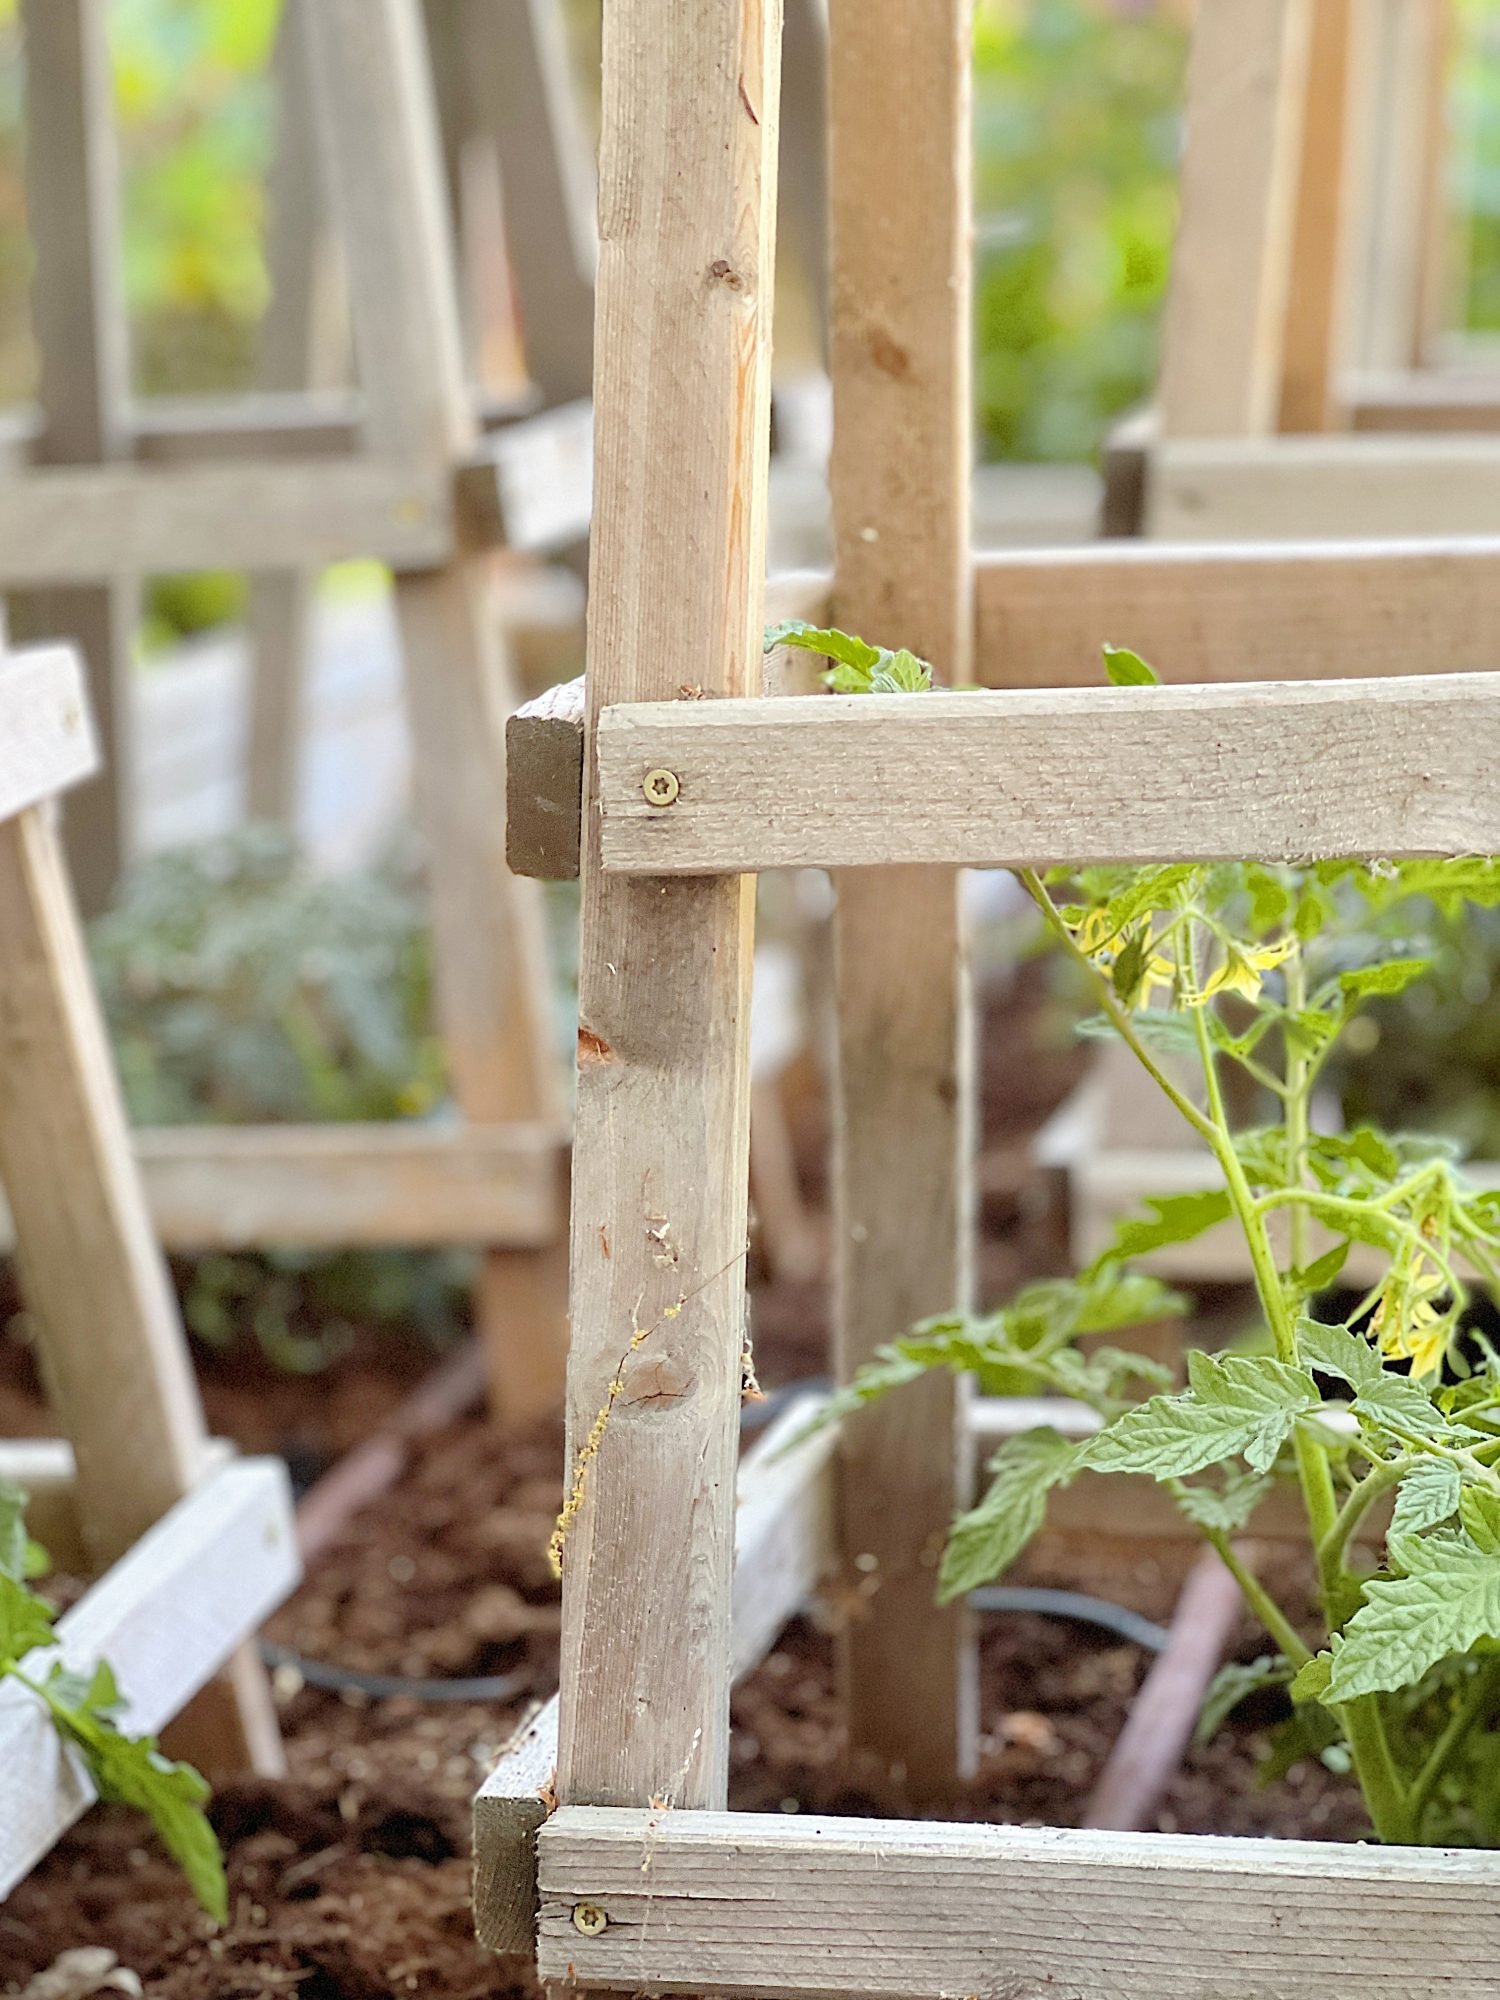 How to Grow the Best Tomato Plants Ever